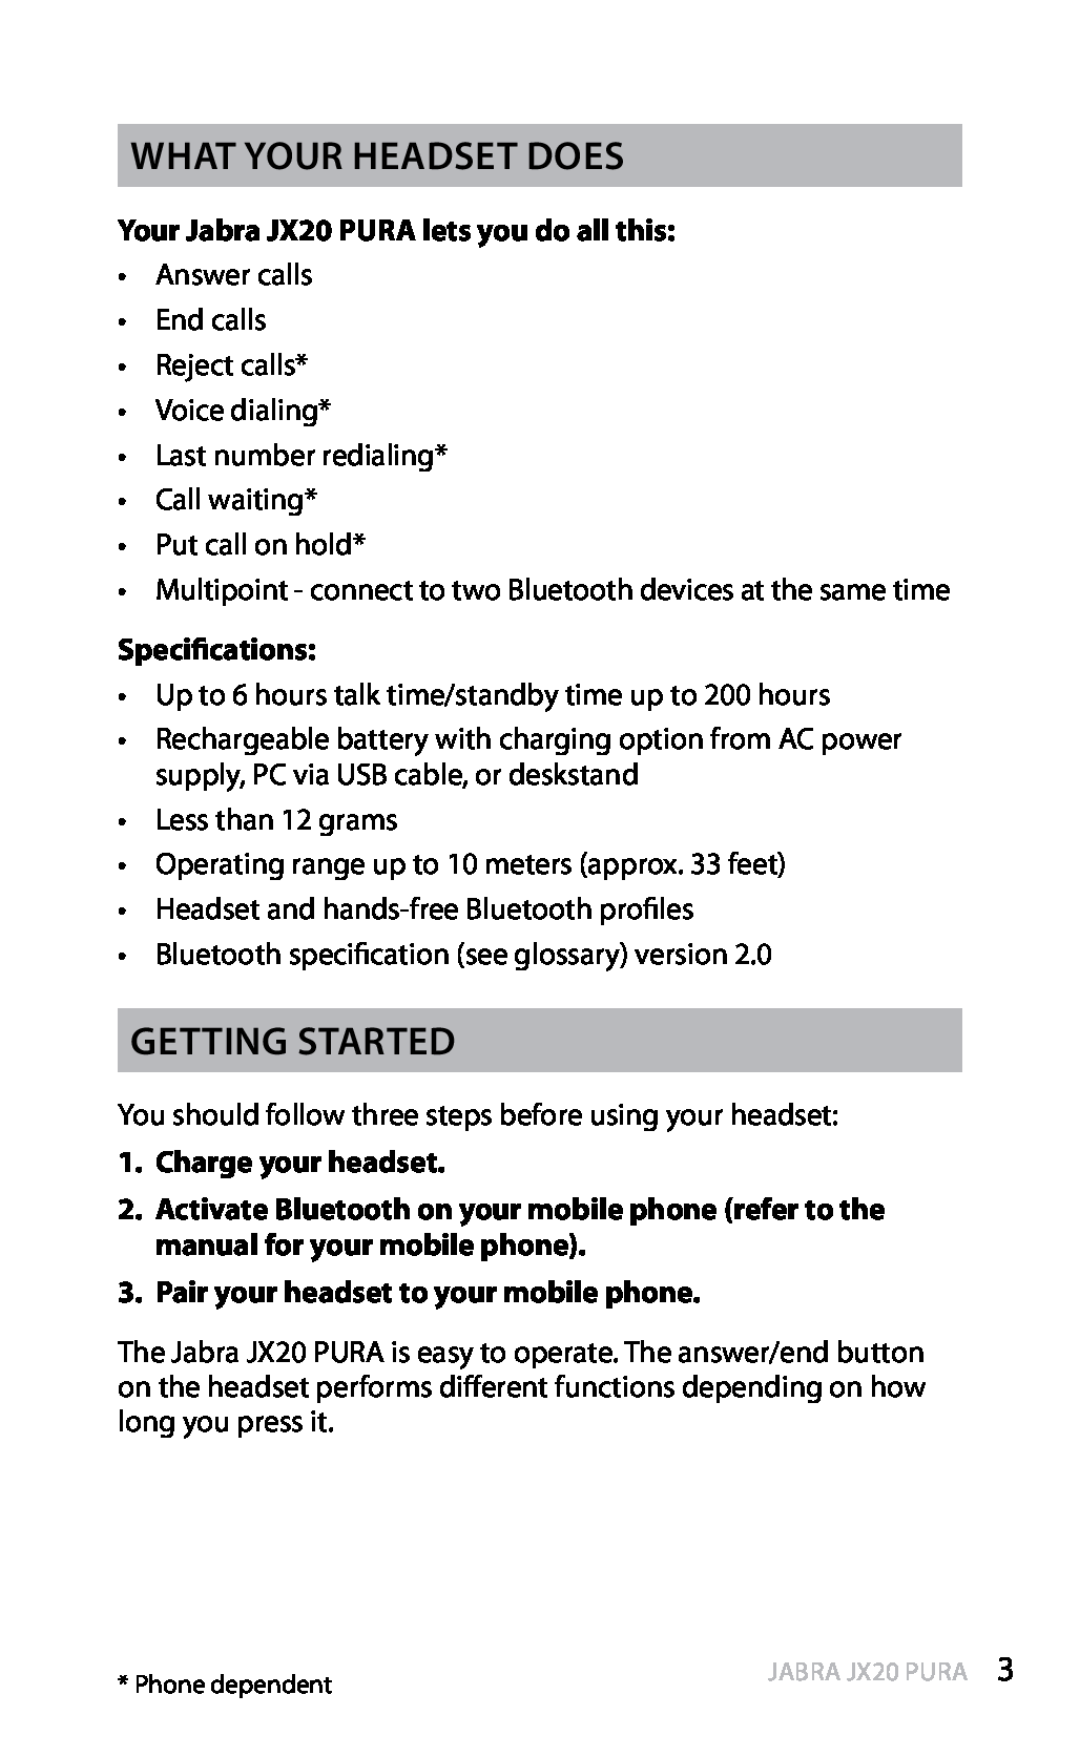 Jabra manual What your headset does, Getting Started, Your Jabra JX20 PURA lets you do all this, Specifications, english 